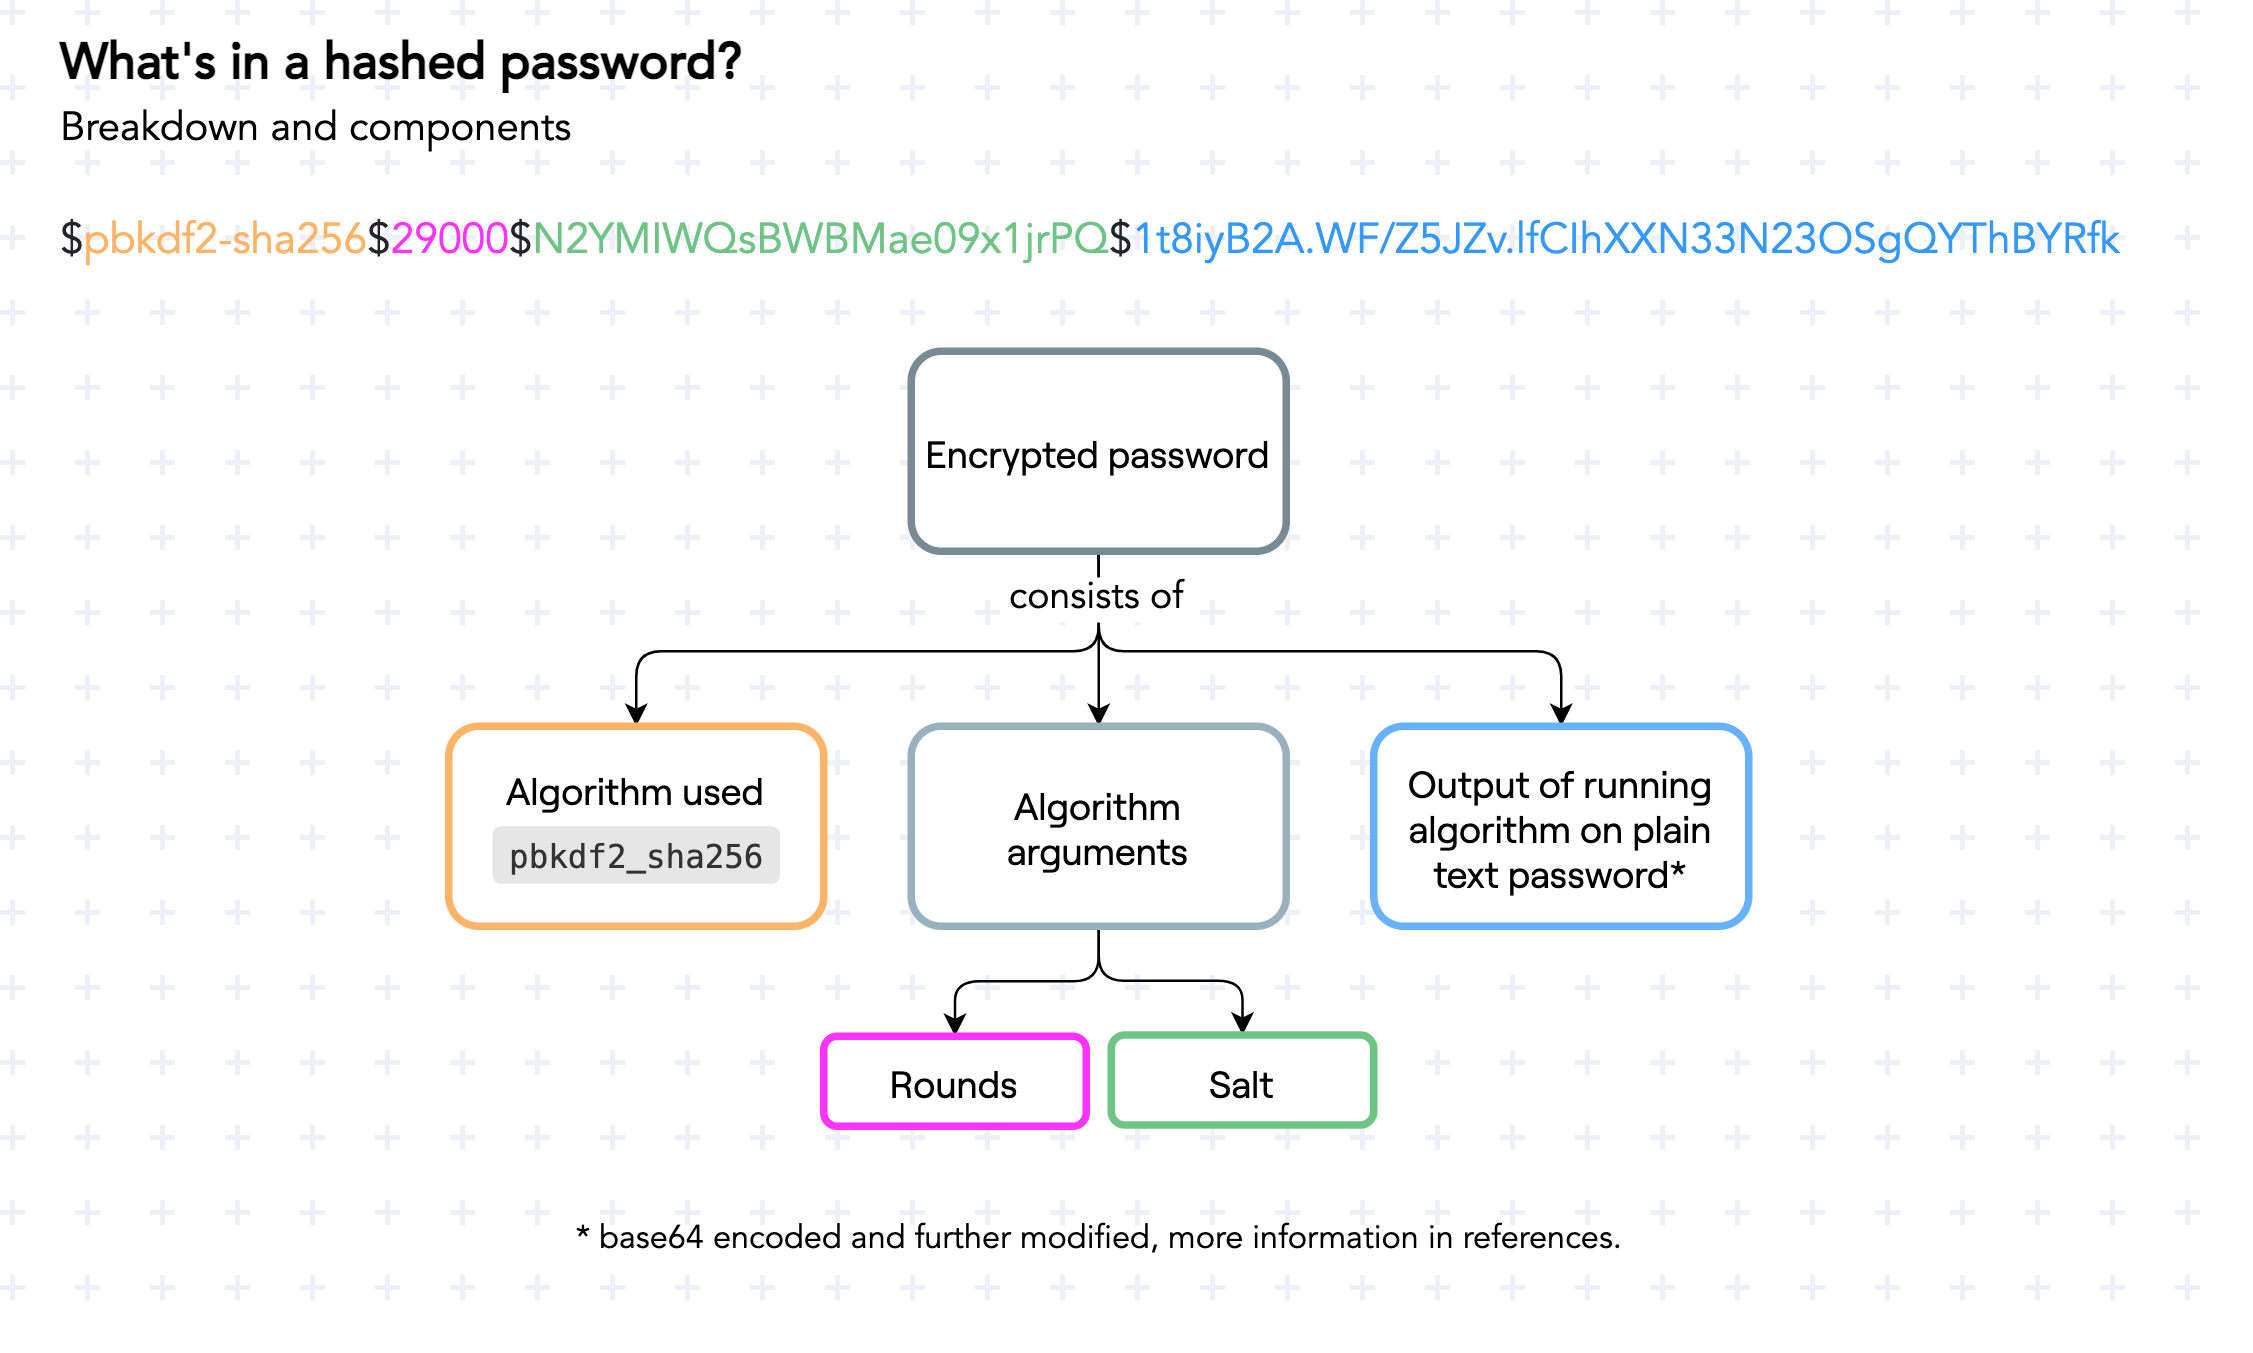 Diagram of composition of a hashed password